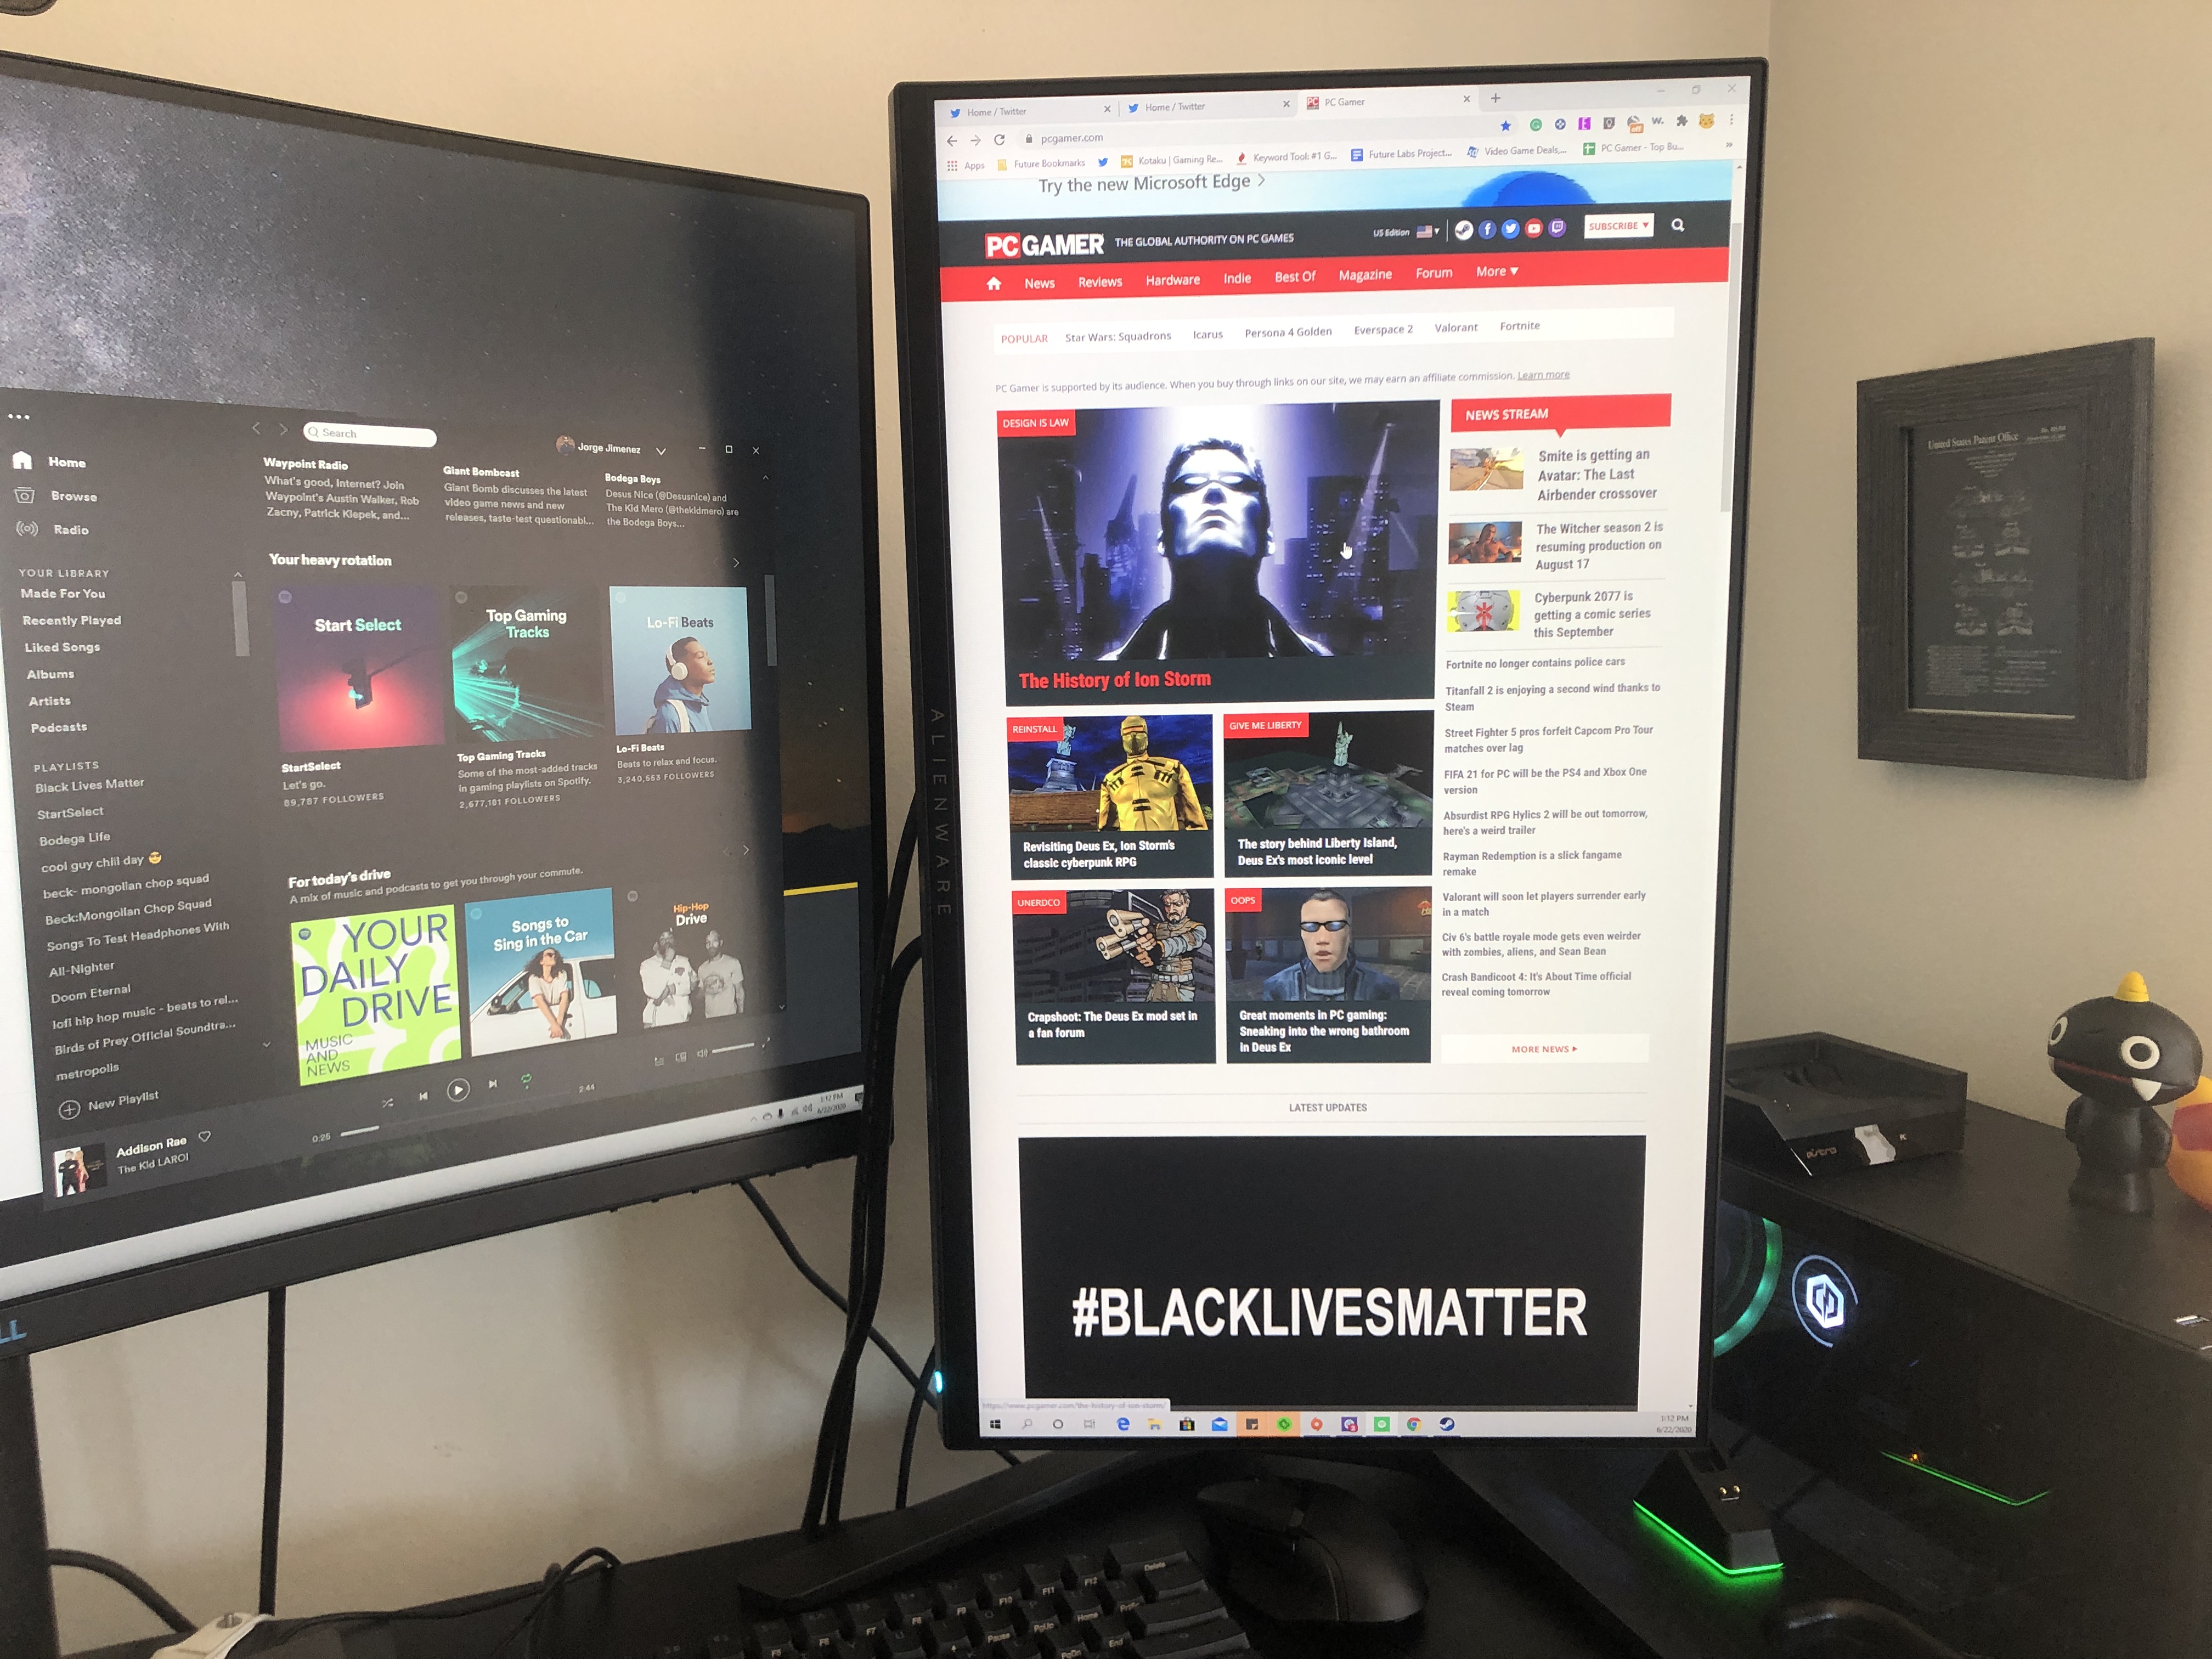 Alienware 25 AW2521HF gaming monitor in portrait mode with PC Gamer on-screen